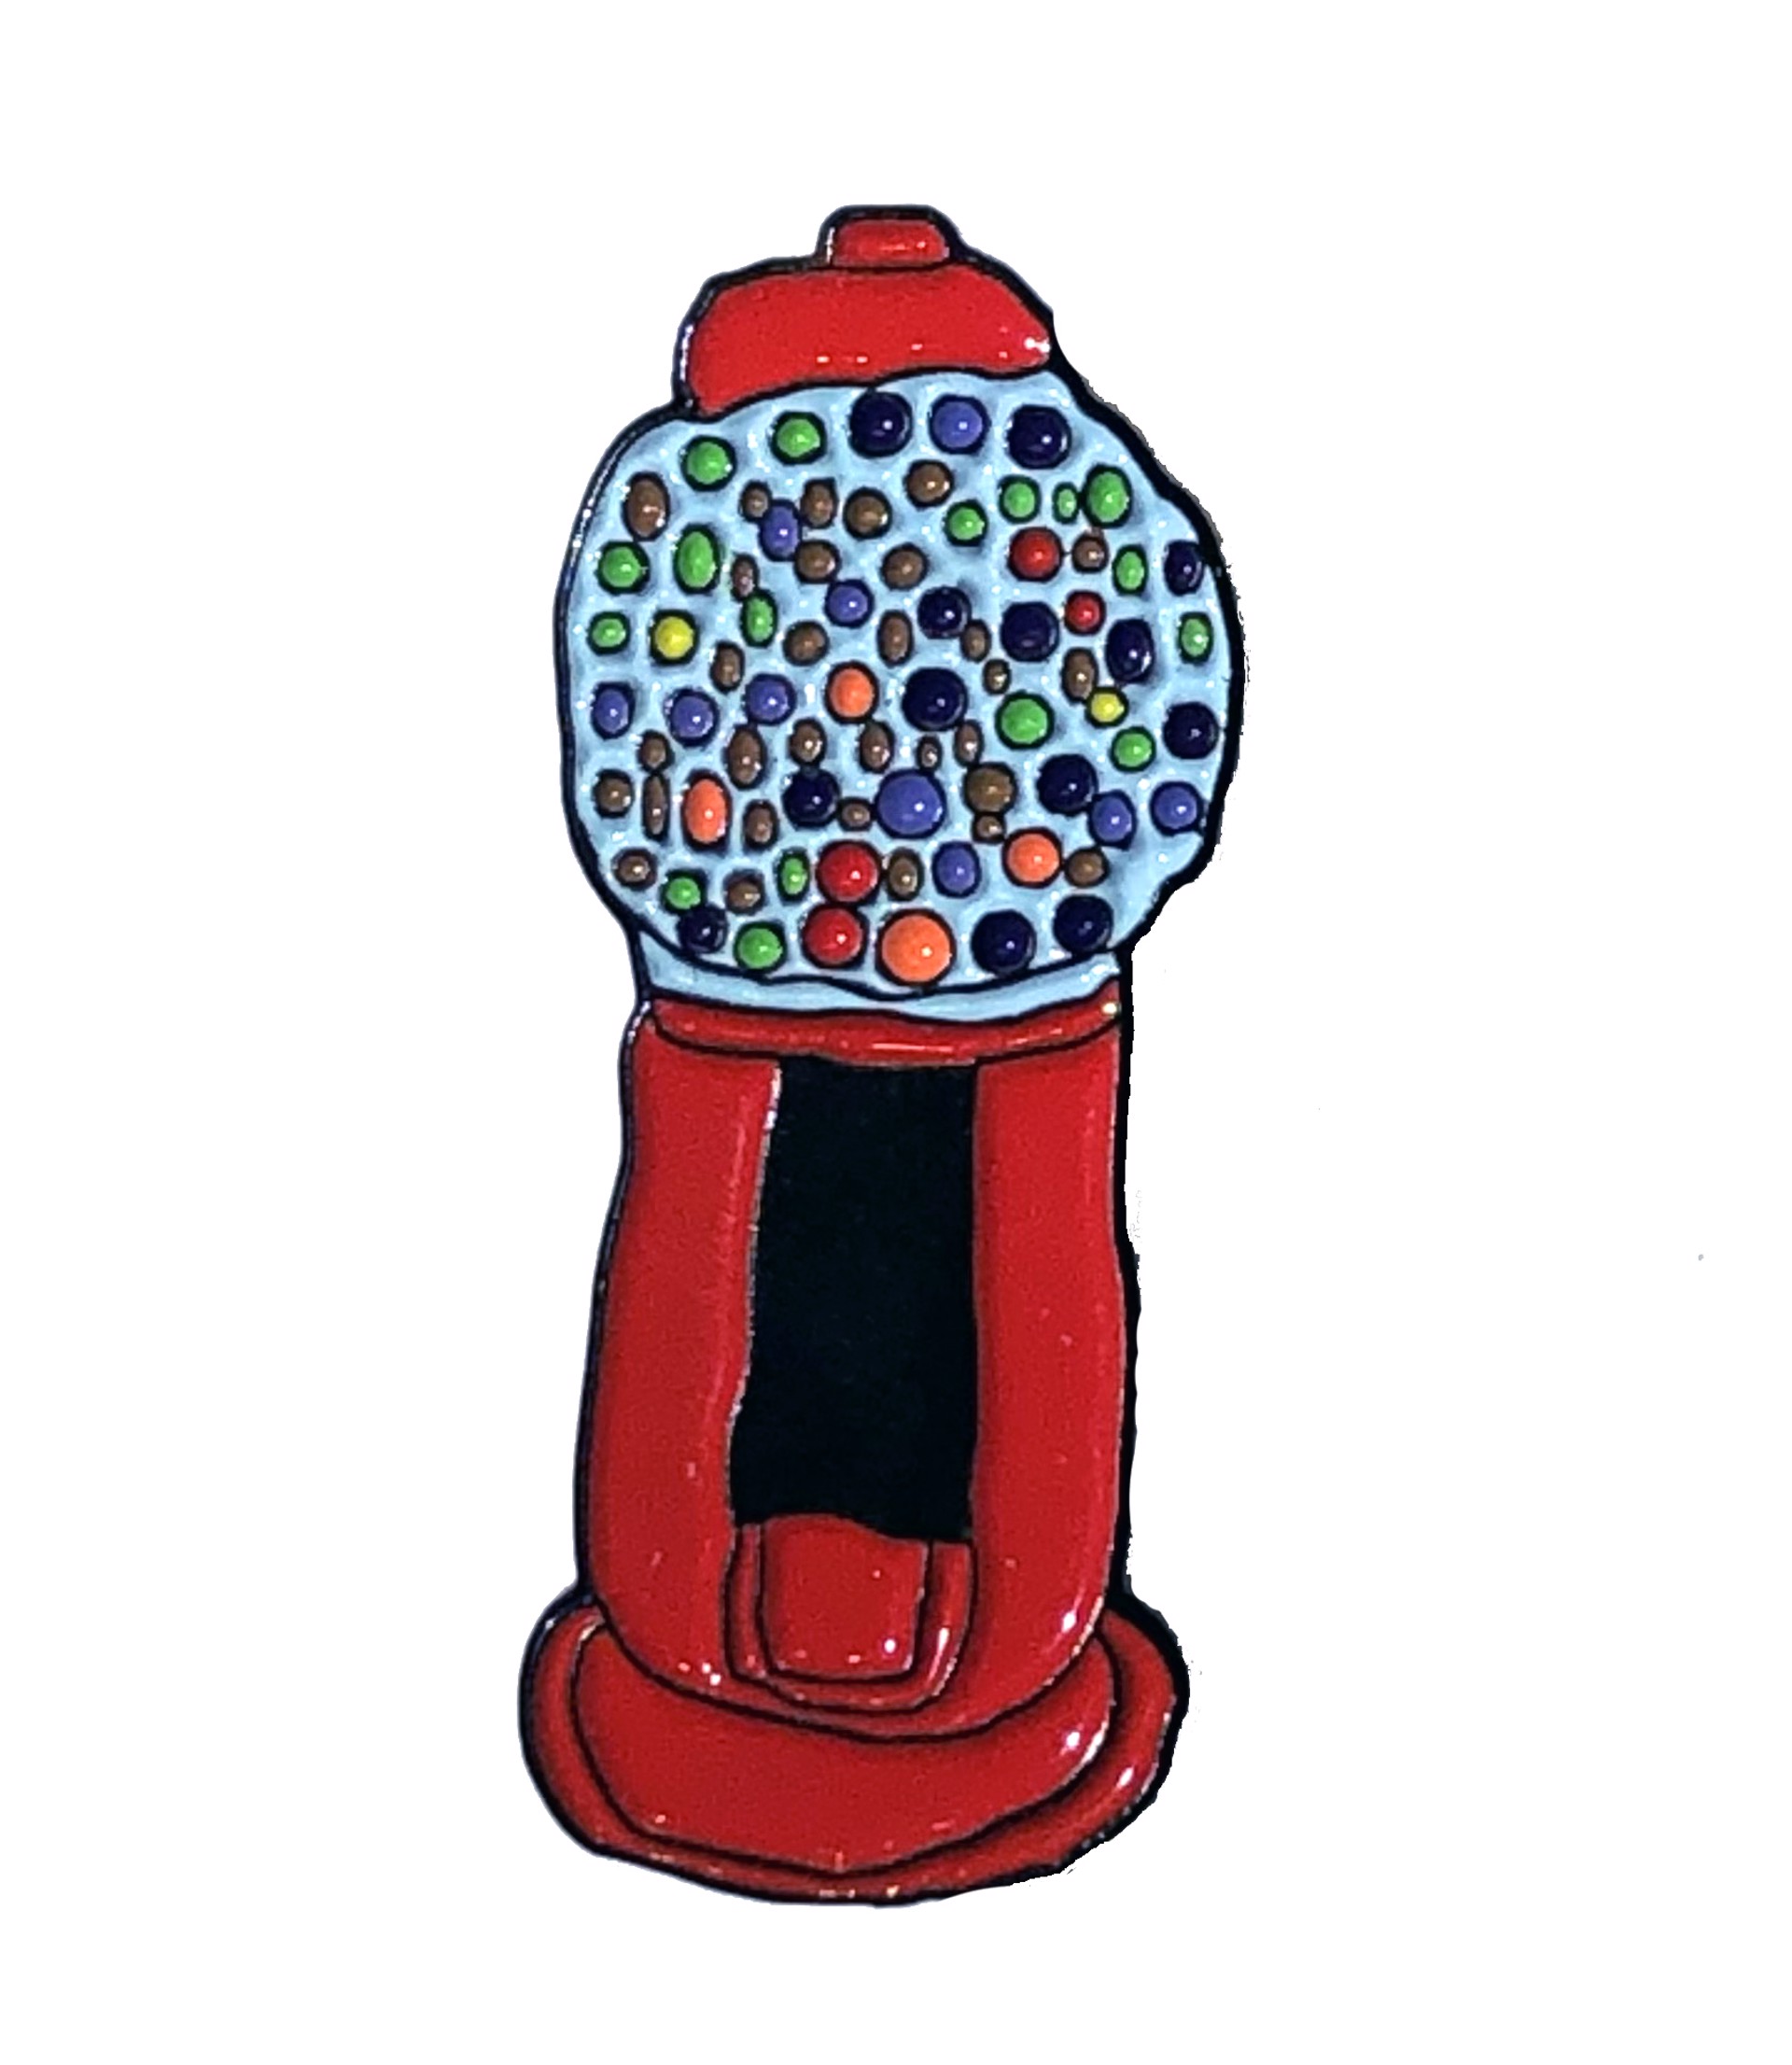 Enamel Pin (Gumball Machine by Imani Turner) by Art Enables Merchandise